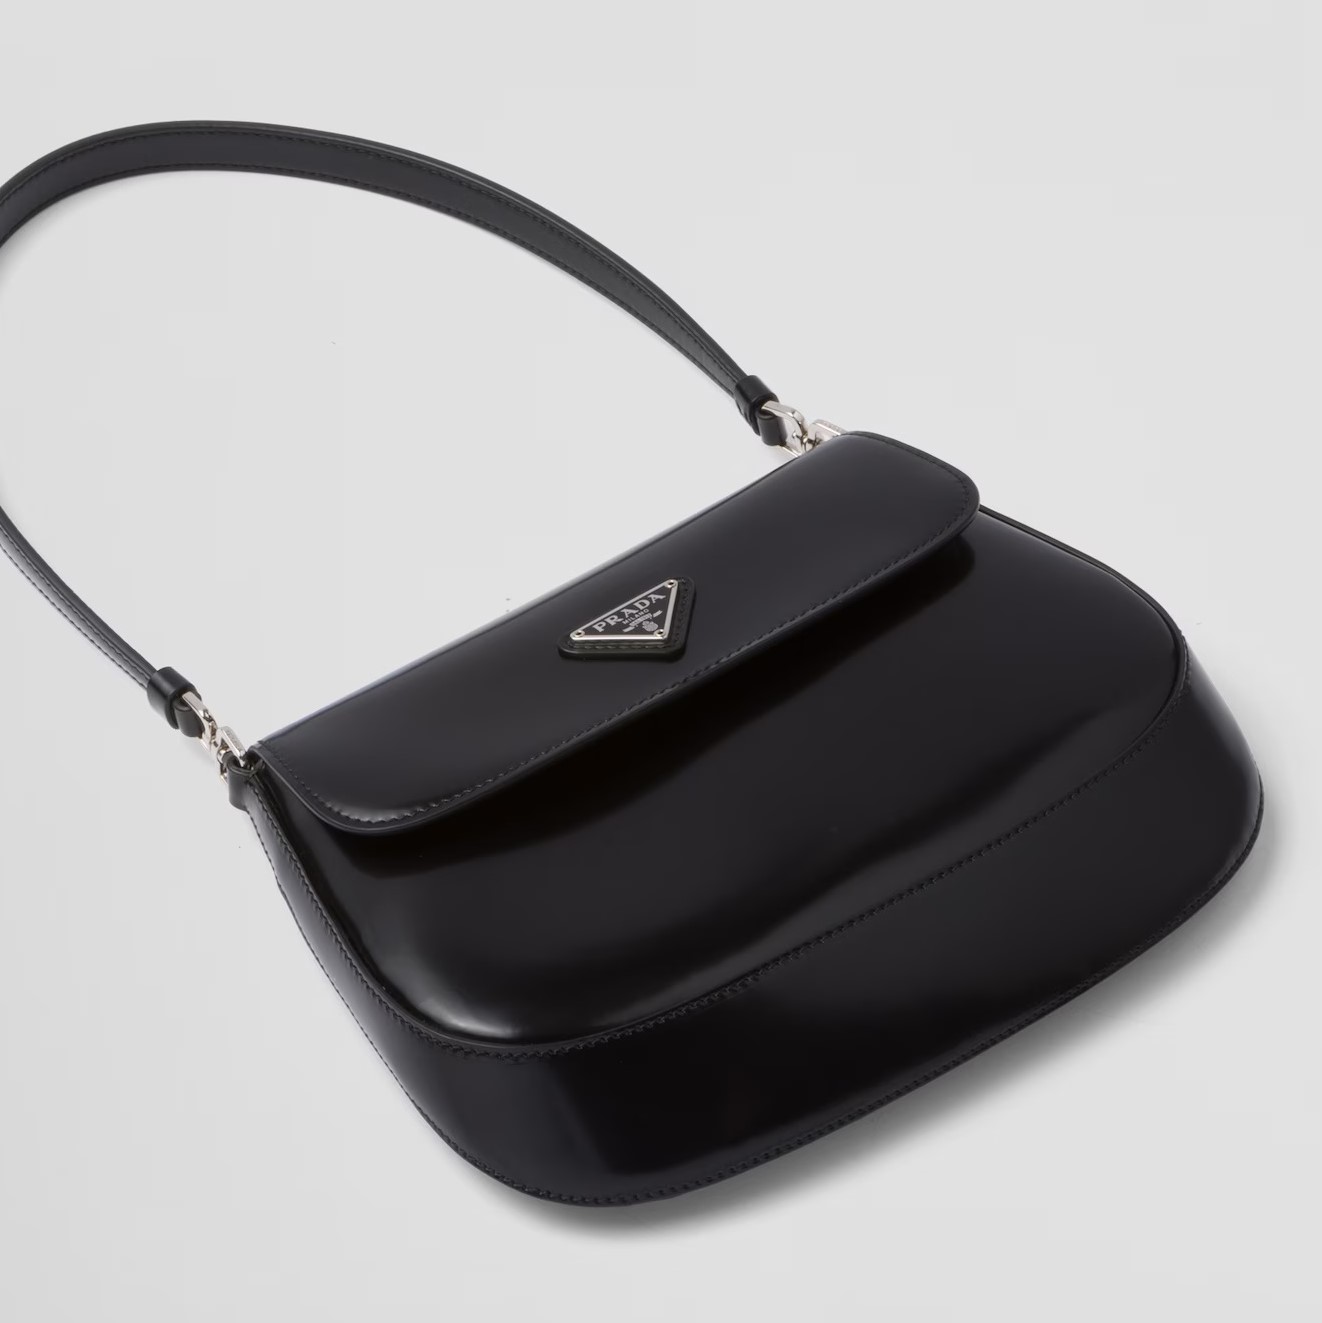 TÚI XÁCH PRADA CLEO BRUSHED LEATHER SHOULDER BAG WITH FLAP 11